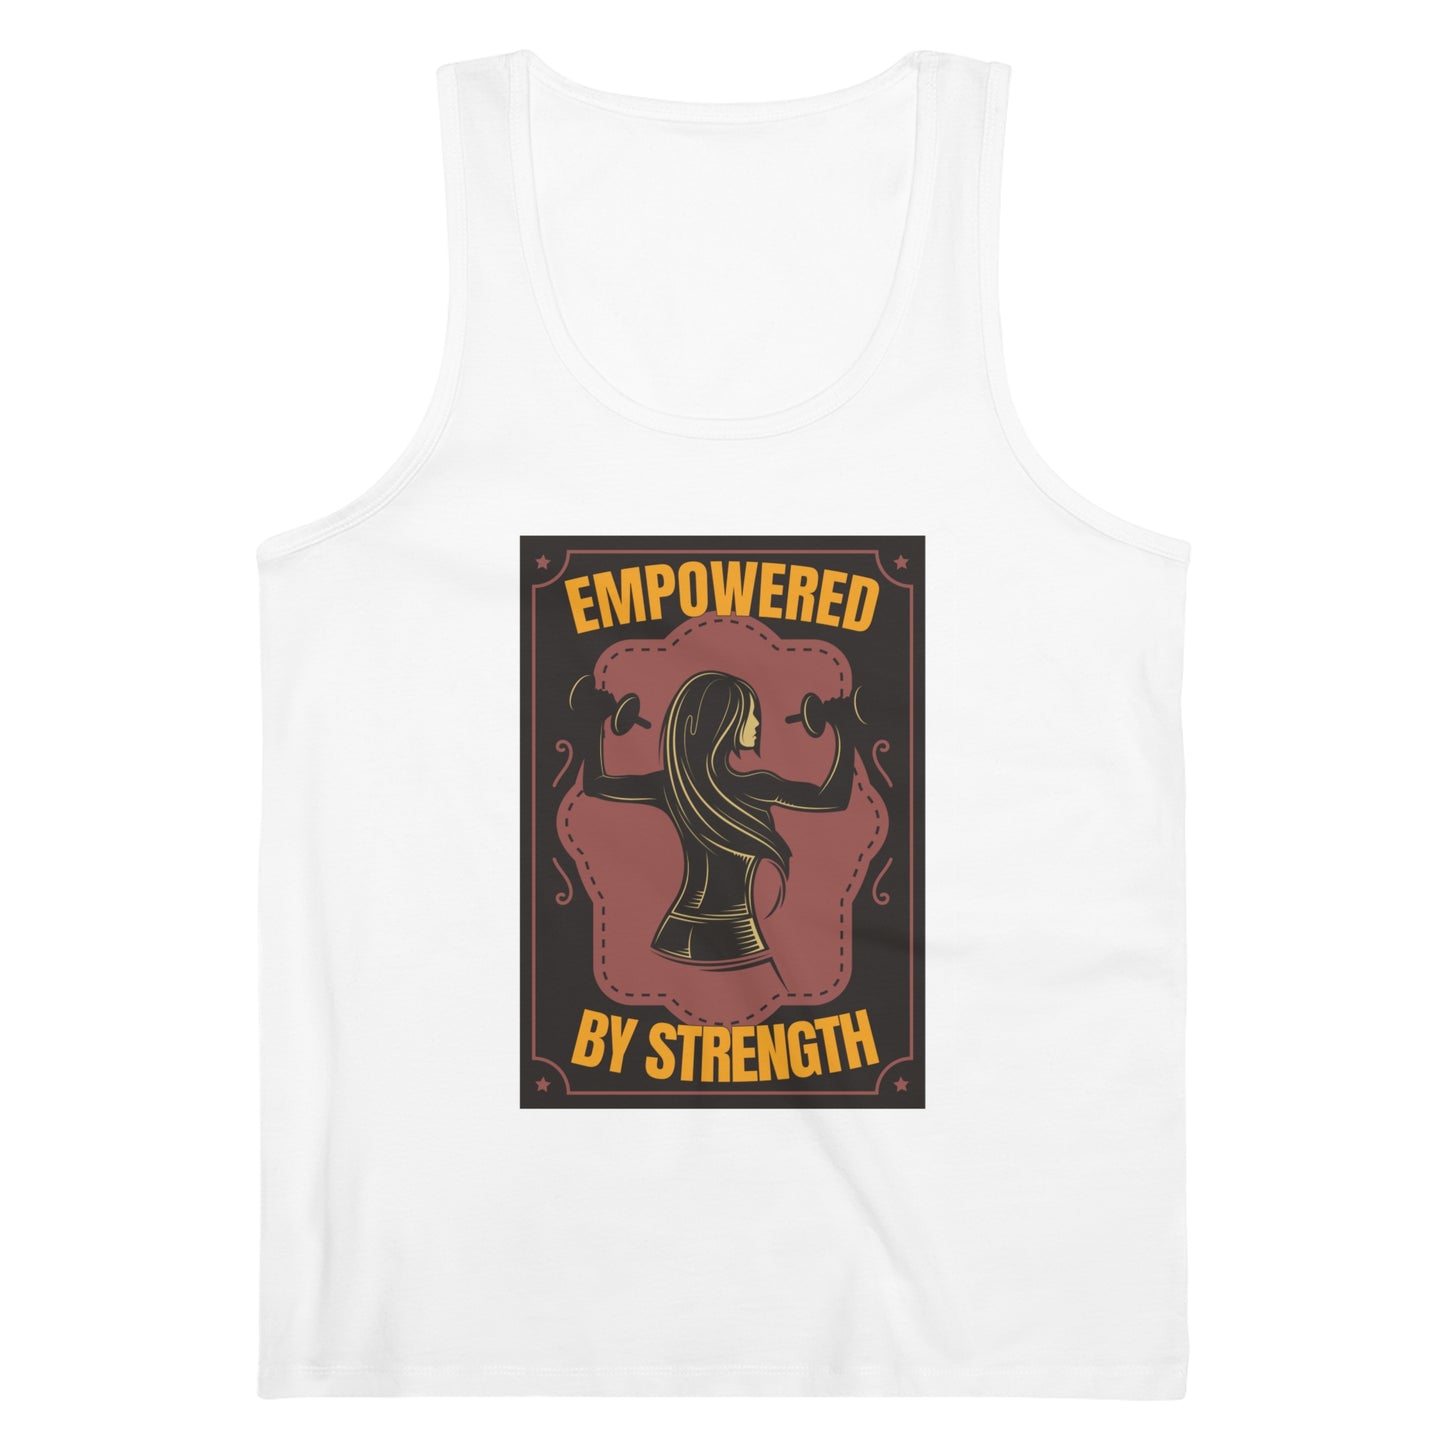 EMPOWERED BY STRENGHT x Tank